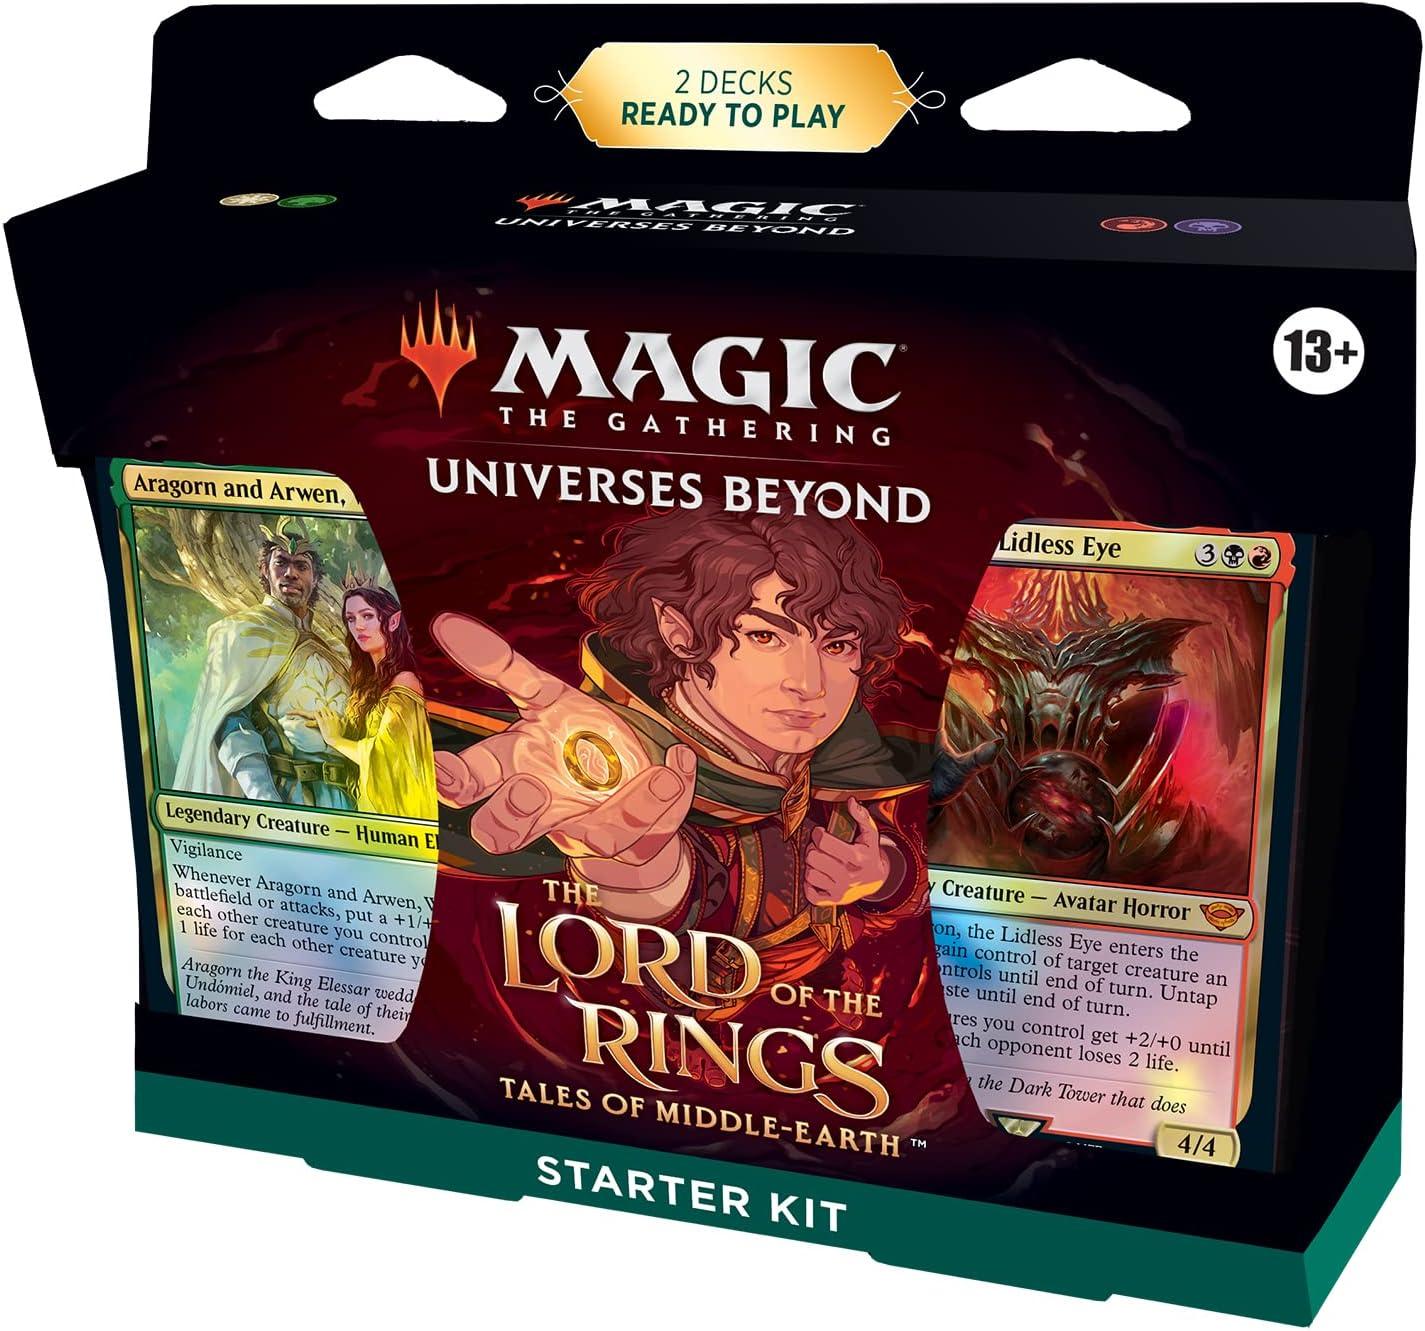 Magic The Gathering The Lord of The Rings Card Game for $16.67